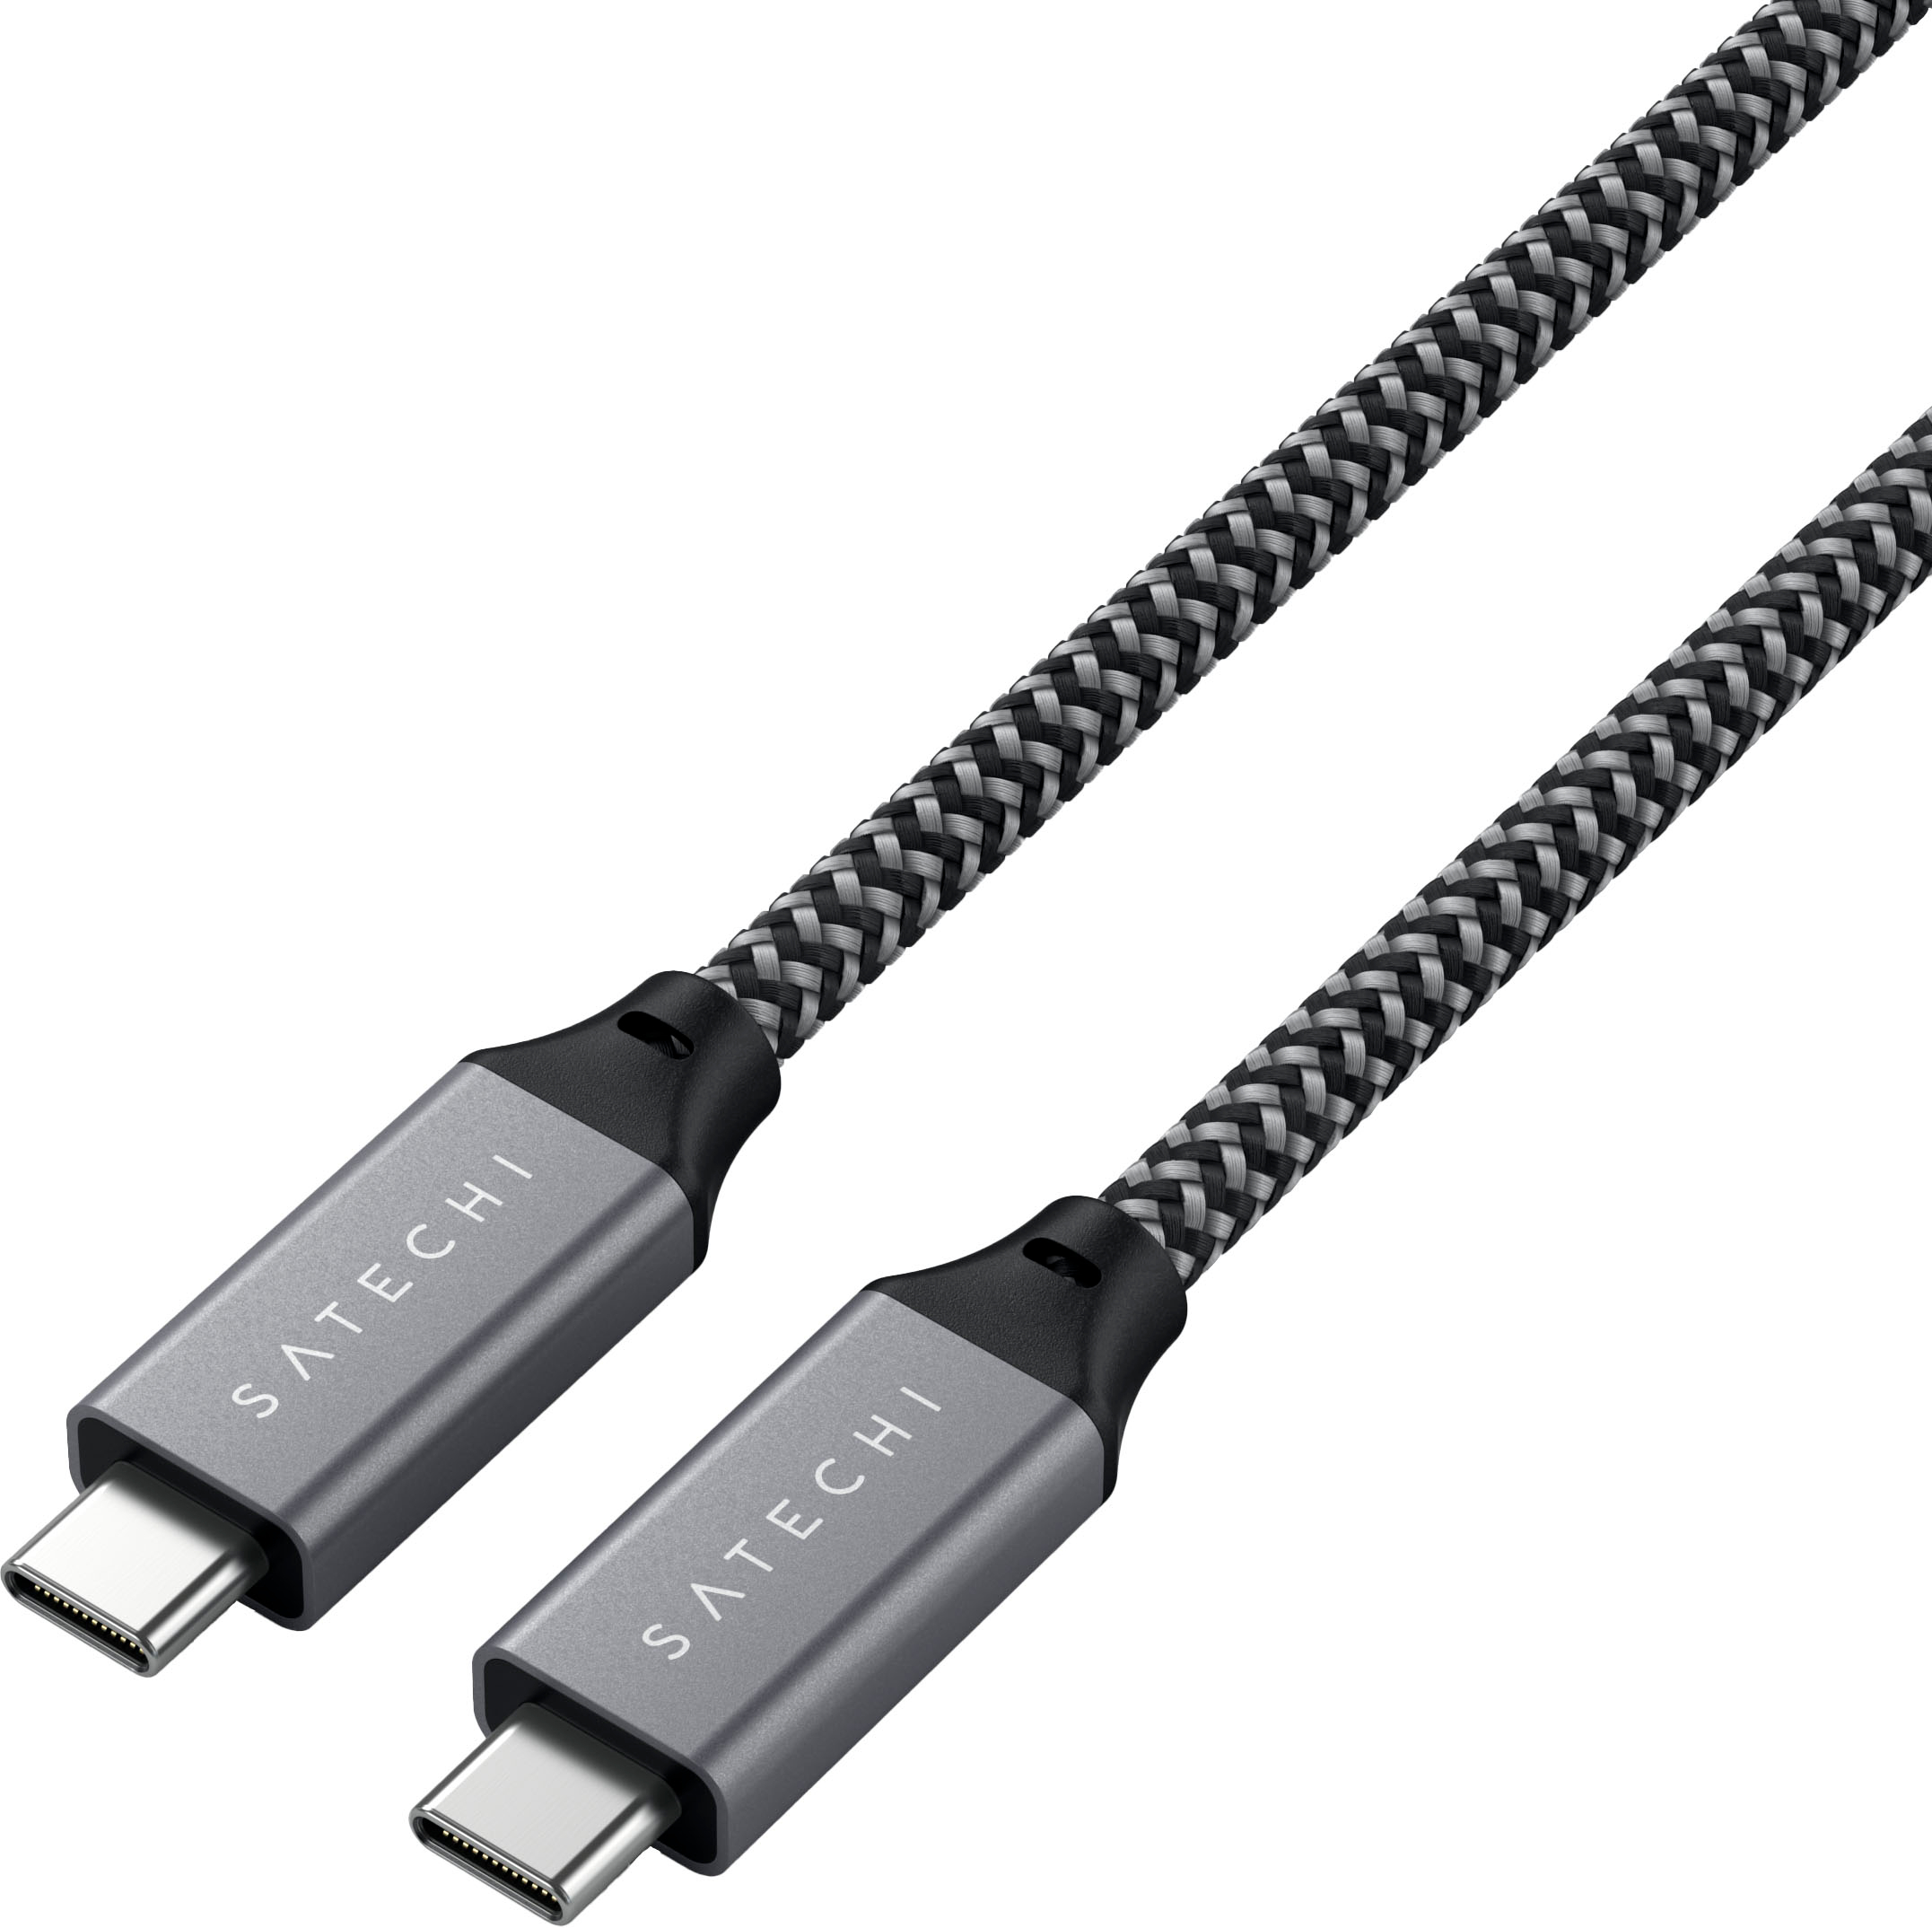 USB C to USB C Cable - USB 3.1 Gen 4 with E-Mark - 6 long